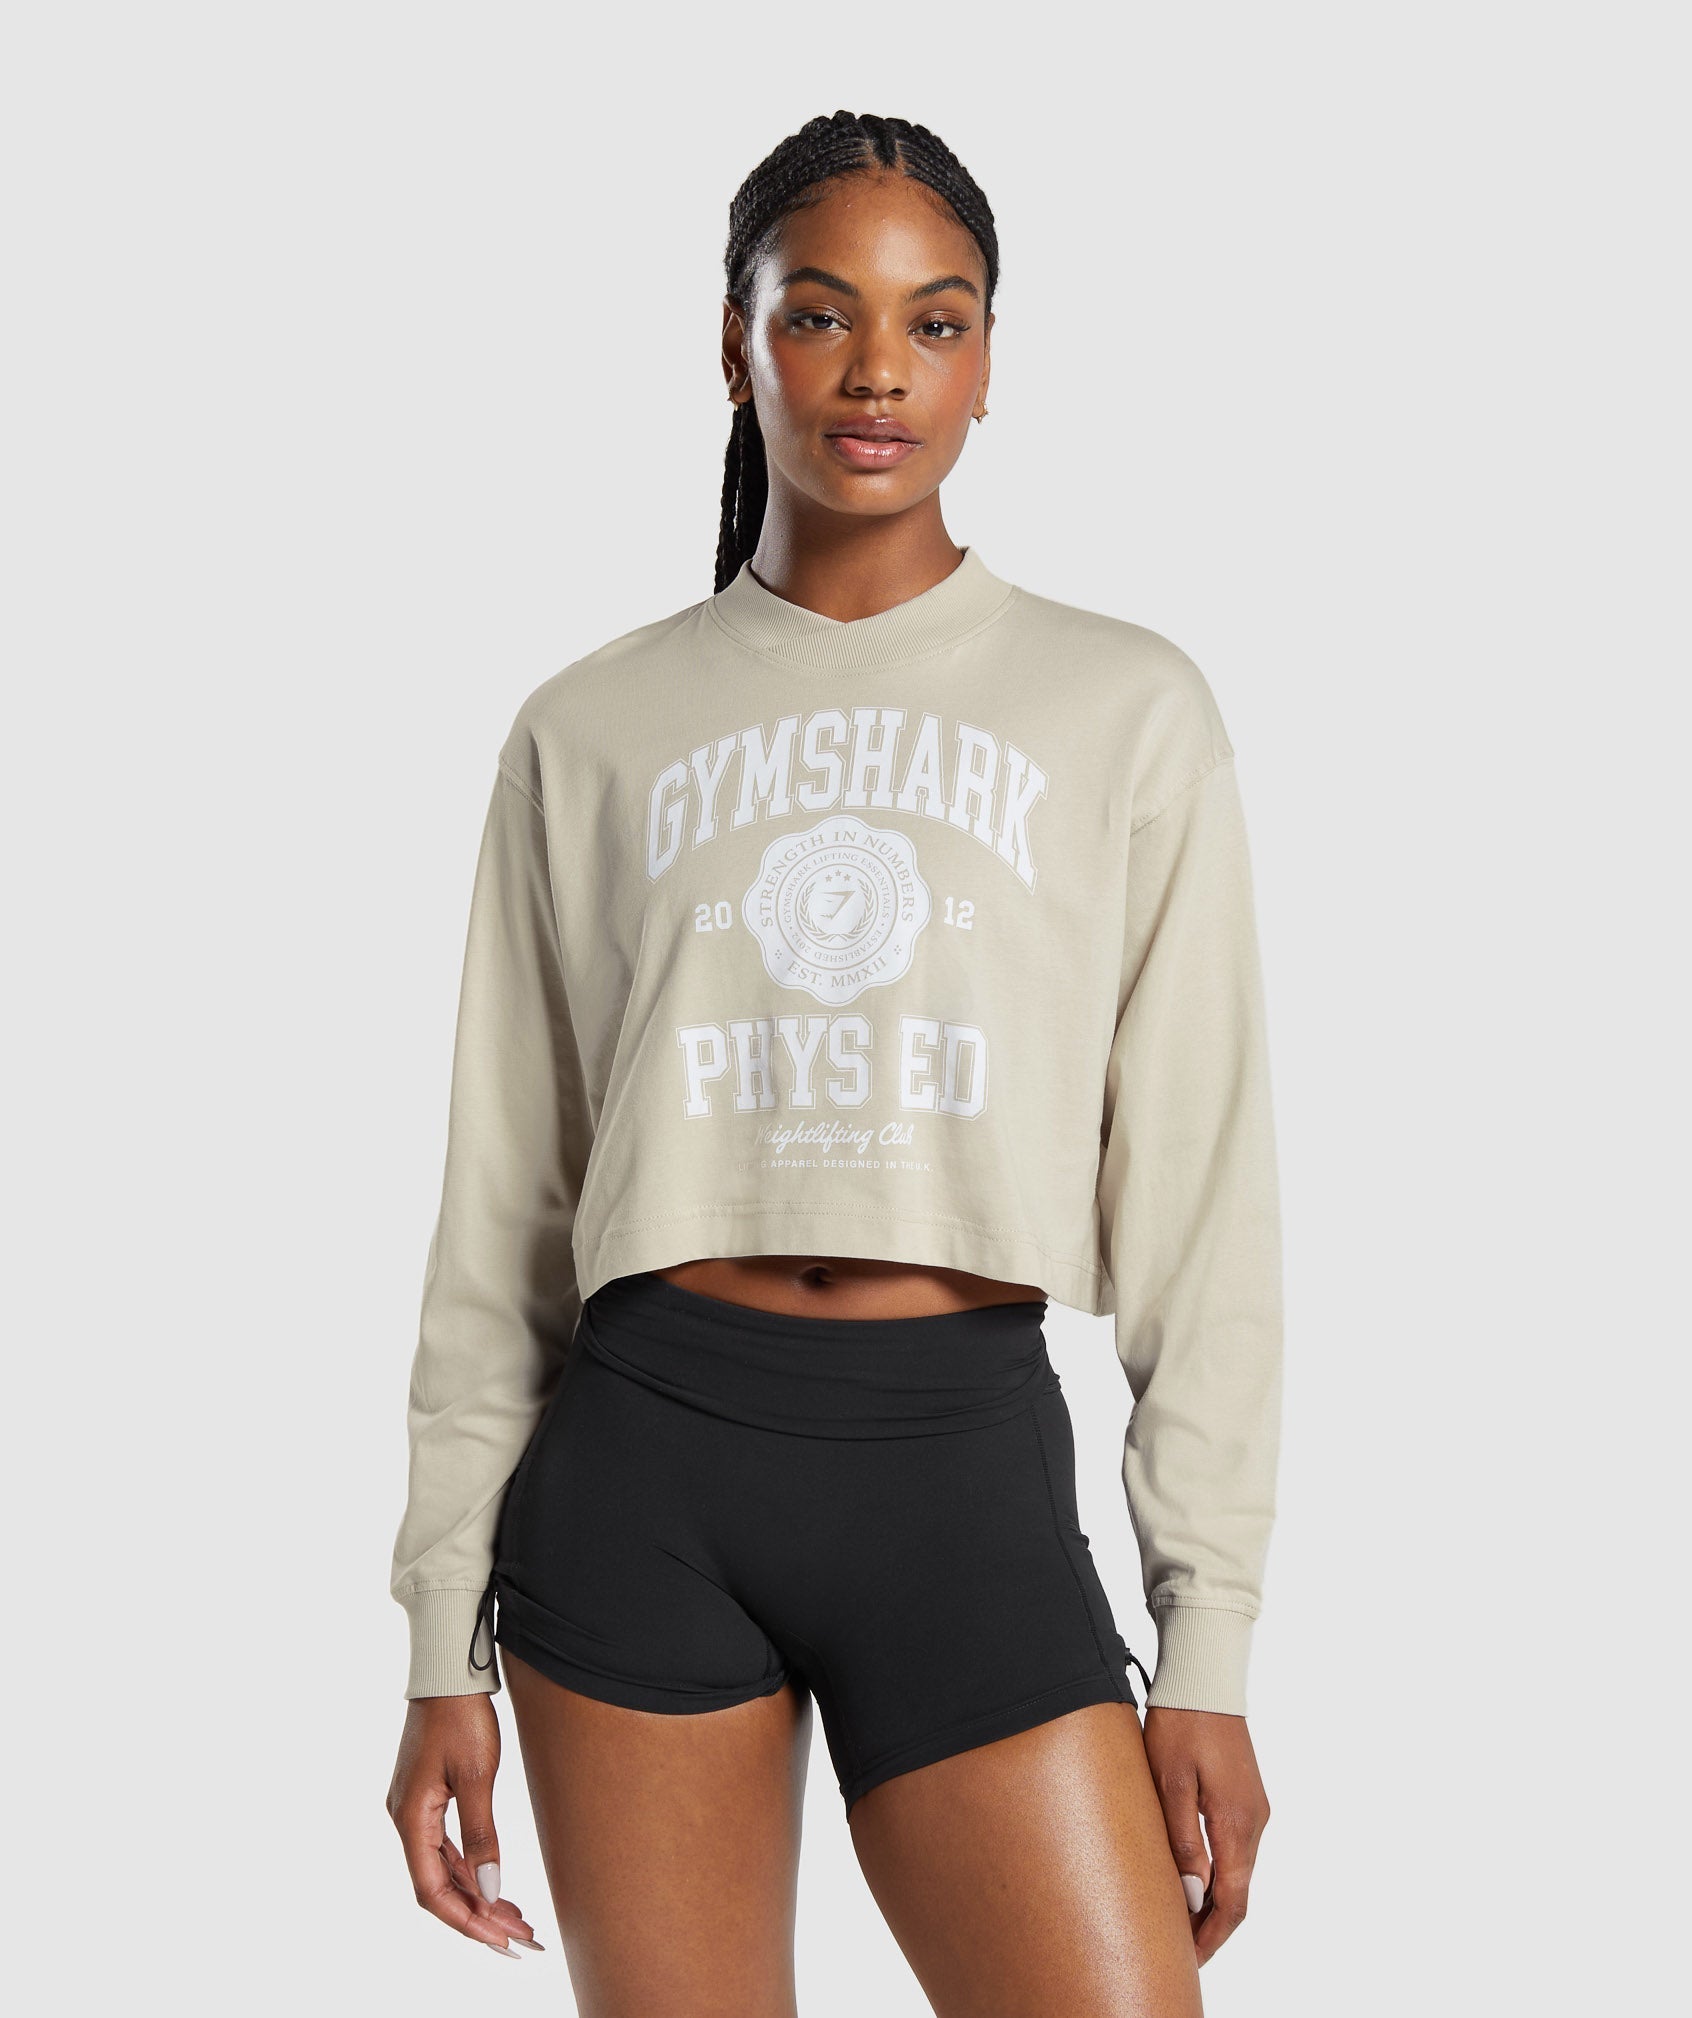 Phys Ed Graphic Long Sleeve T-Shirt